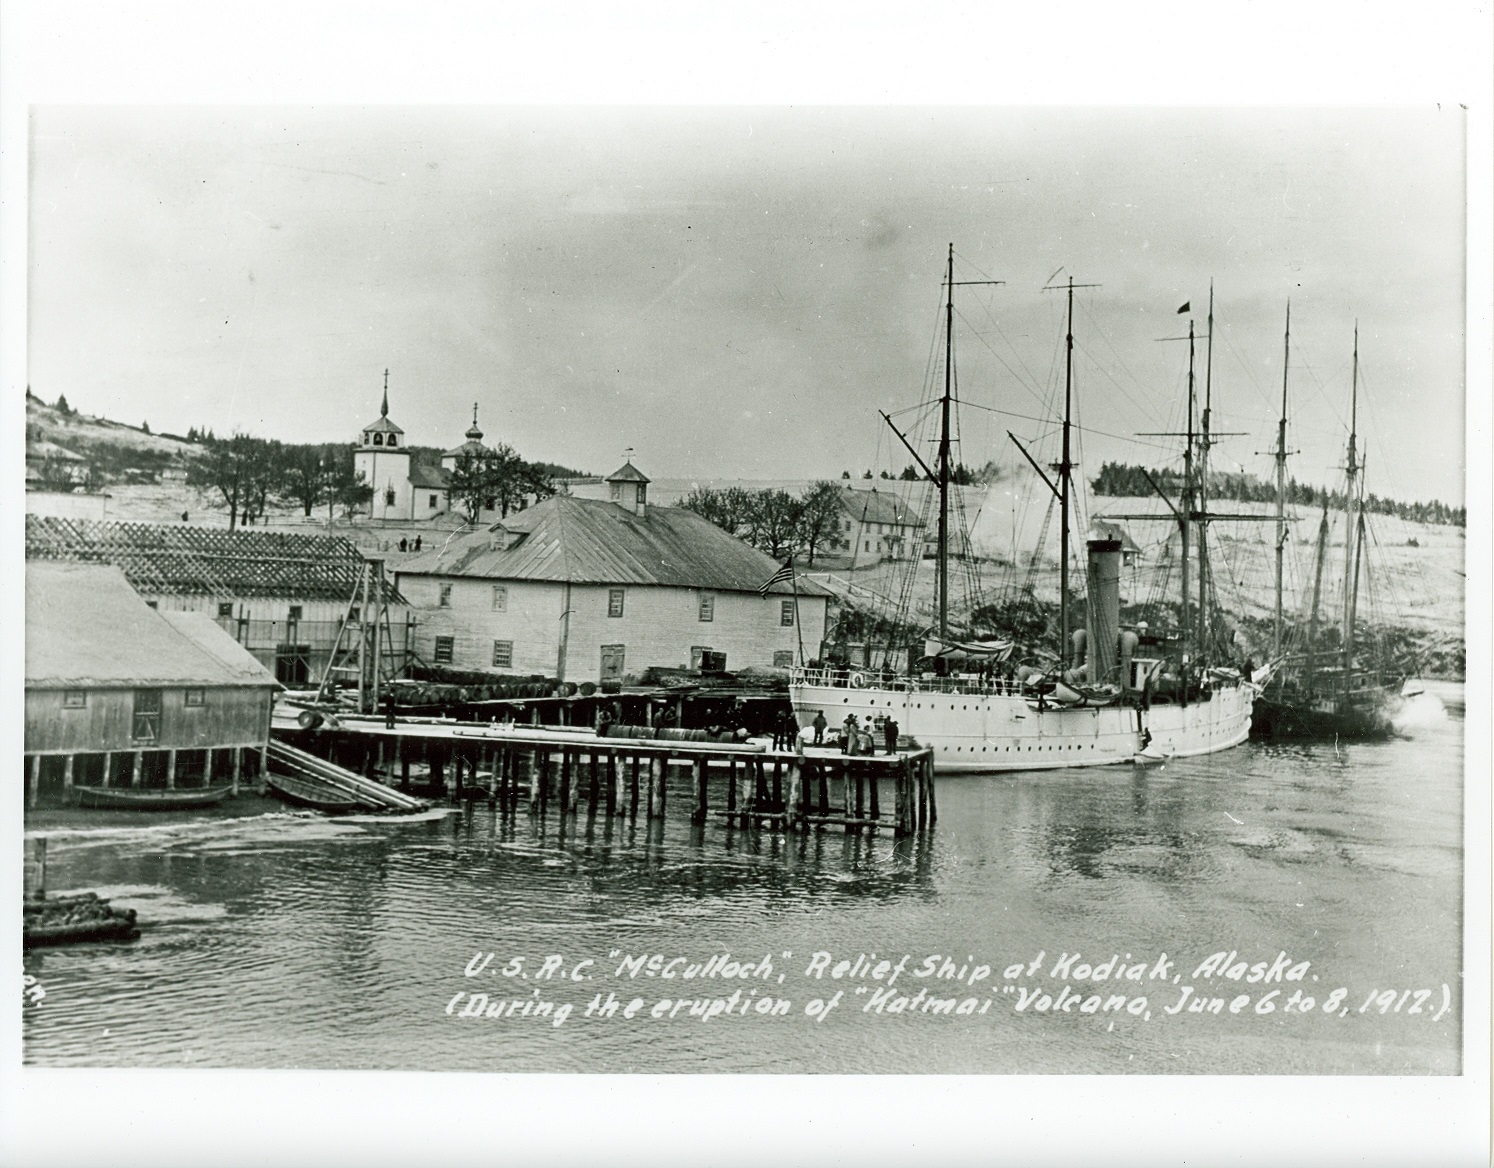 Similar in size and appearance to the Manning, Revenue Cutter McCulloch moored at Kodiak to provide humanitarian support after the volcanic eruption, June 6-9, 1912. (U.S. Coast Guard)